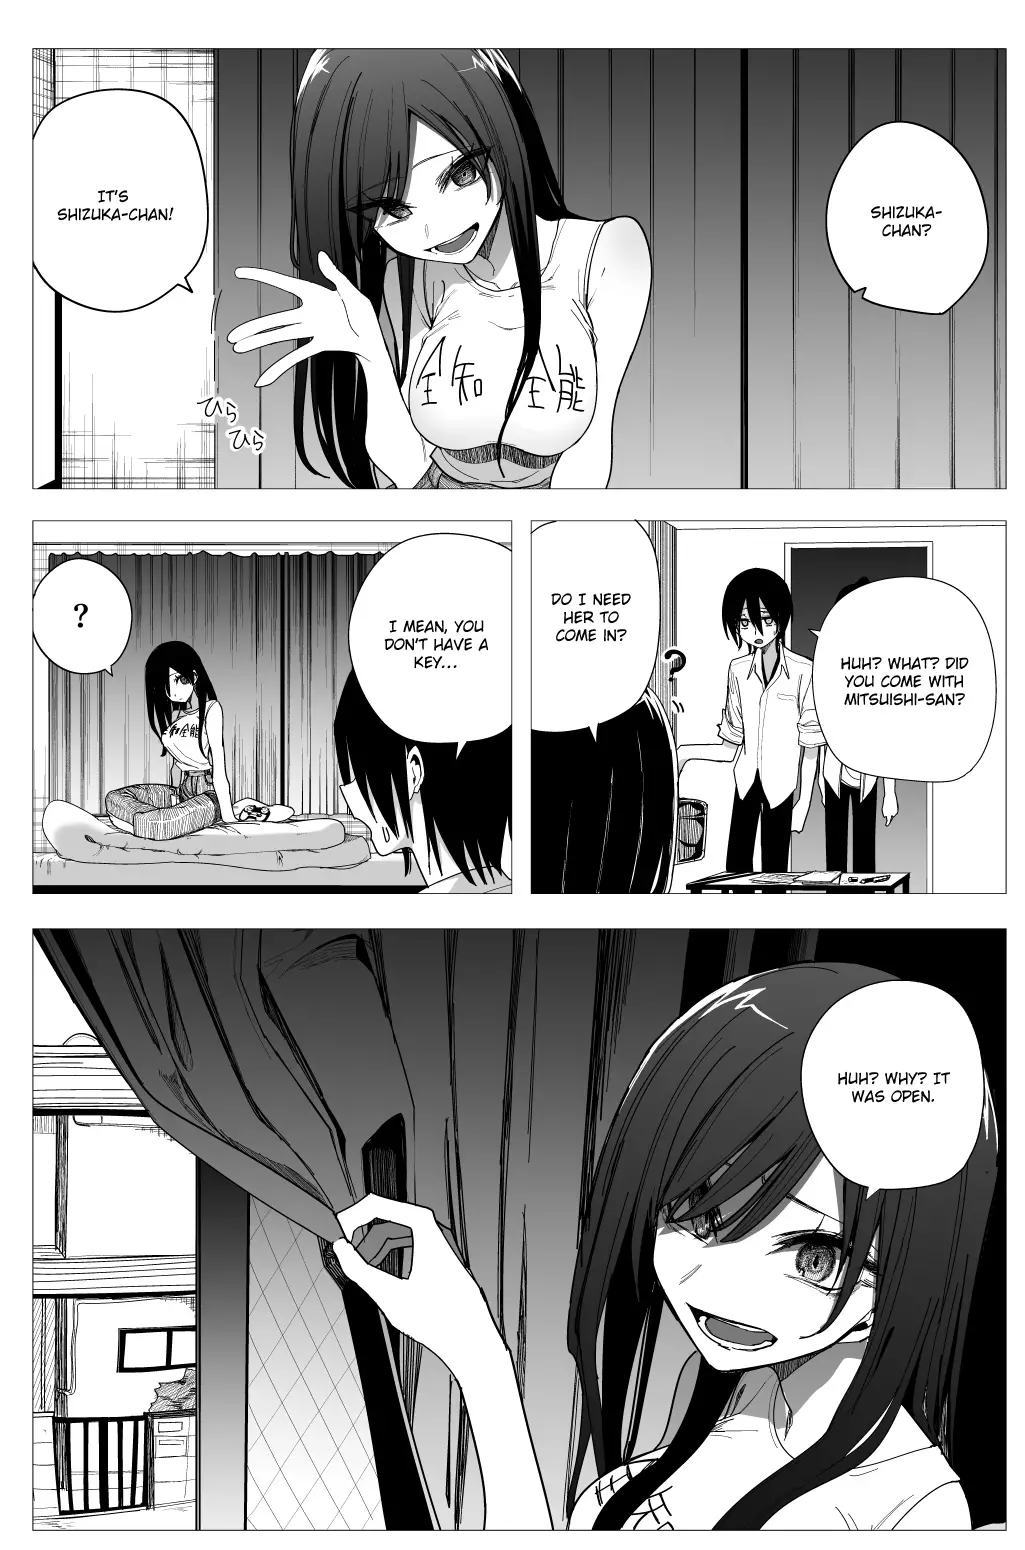 Mitsuishi-San Is Being Weird This Year - 27 page 7-2b07ba00